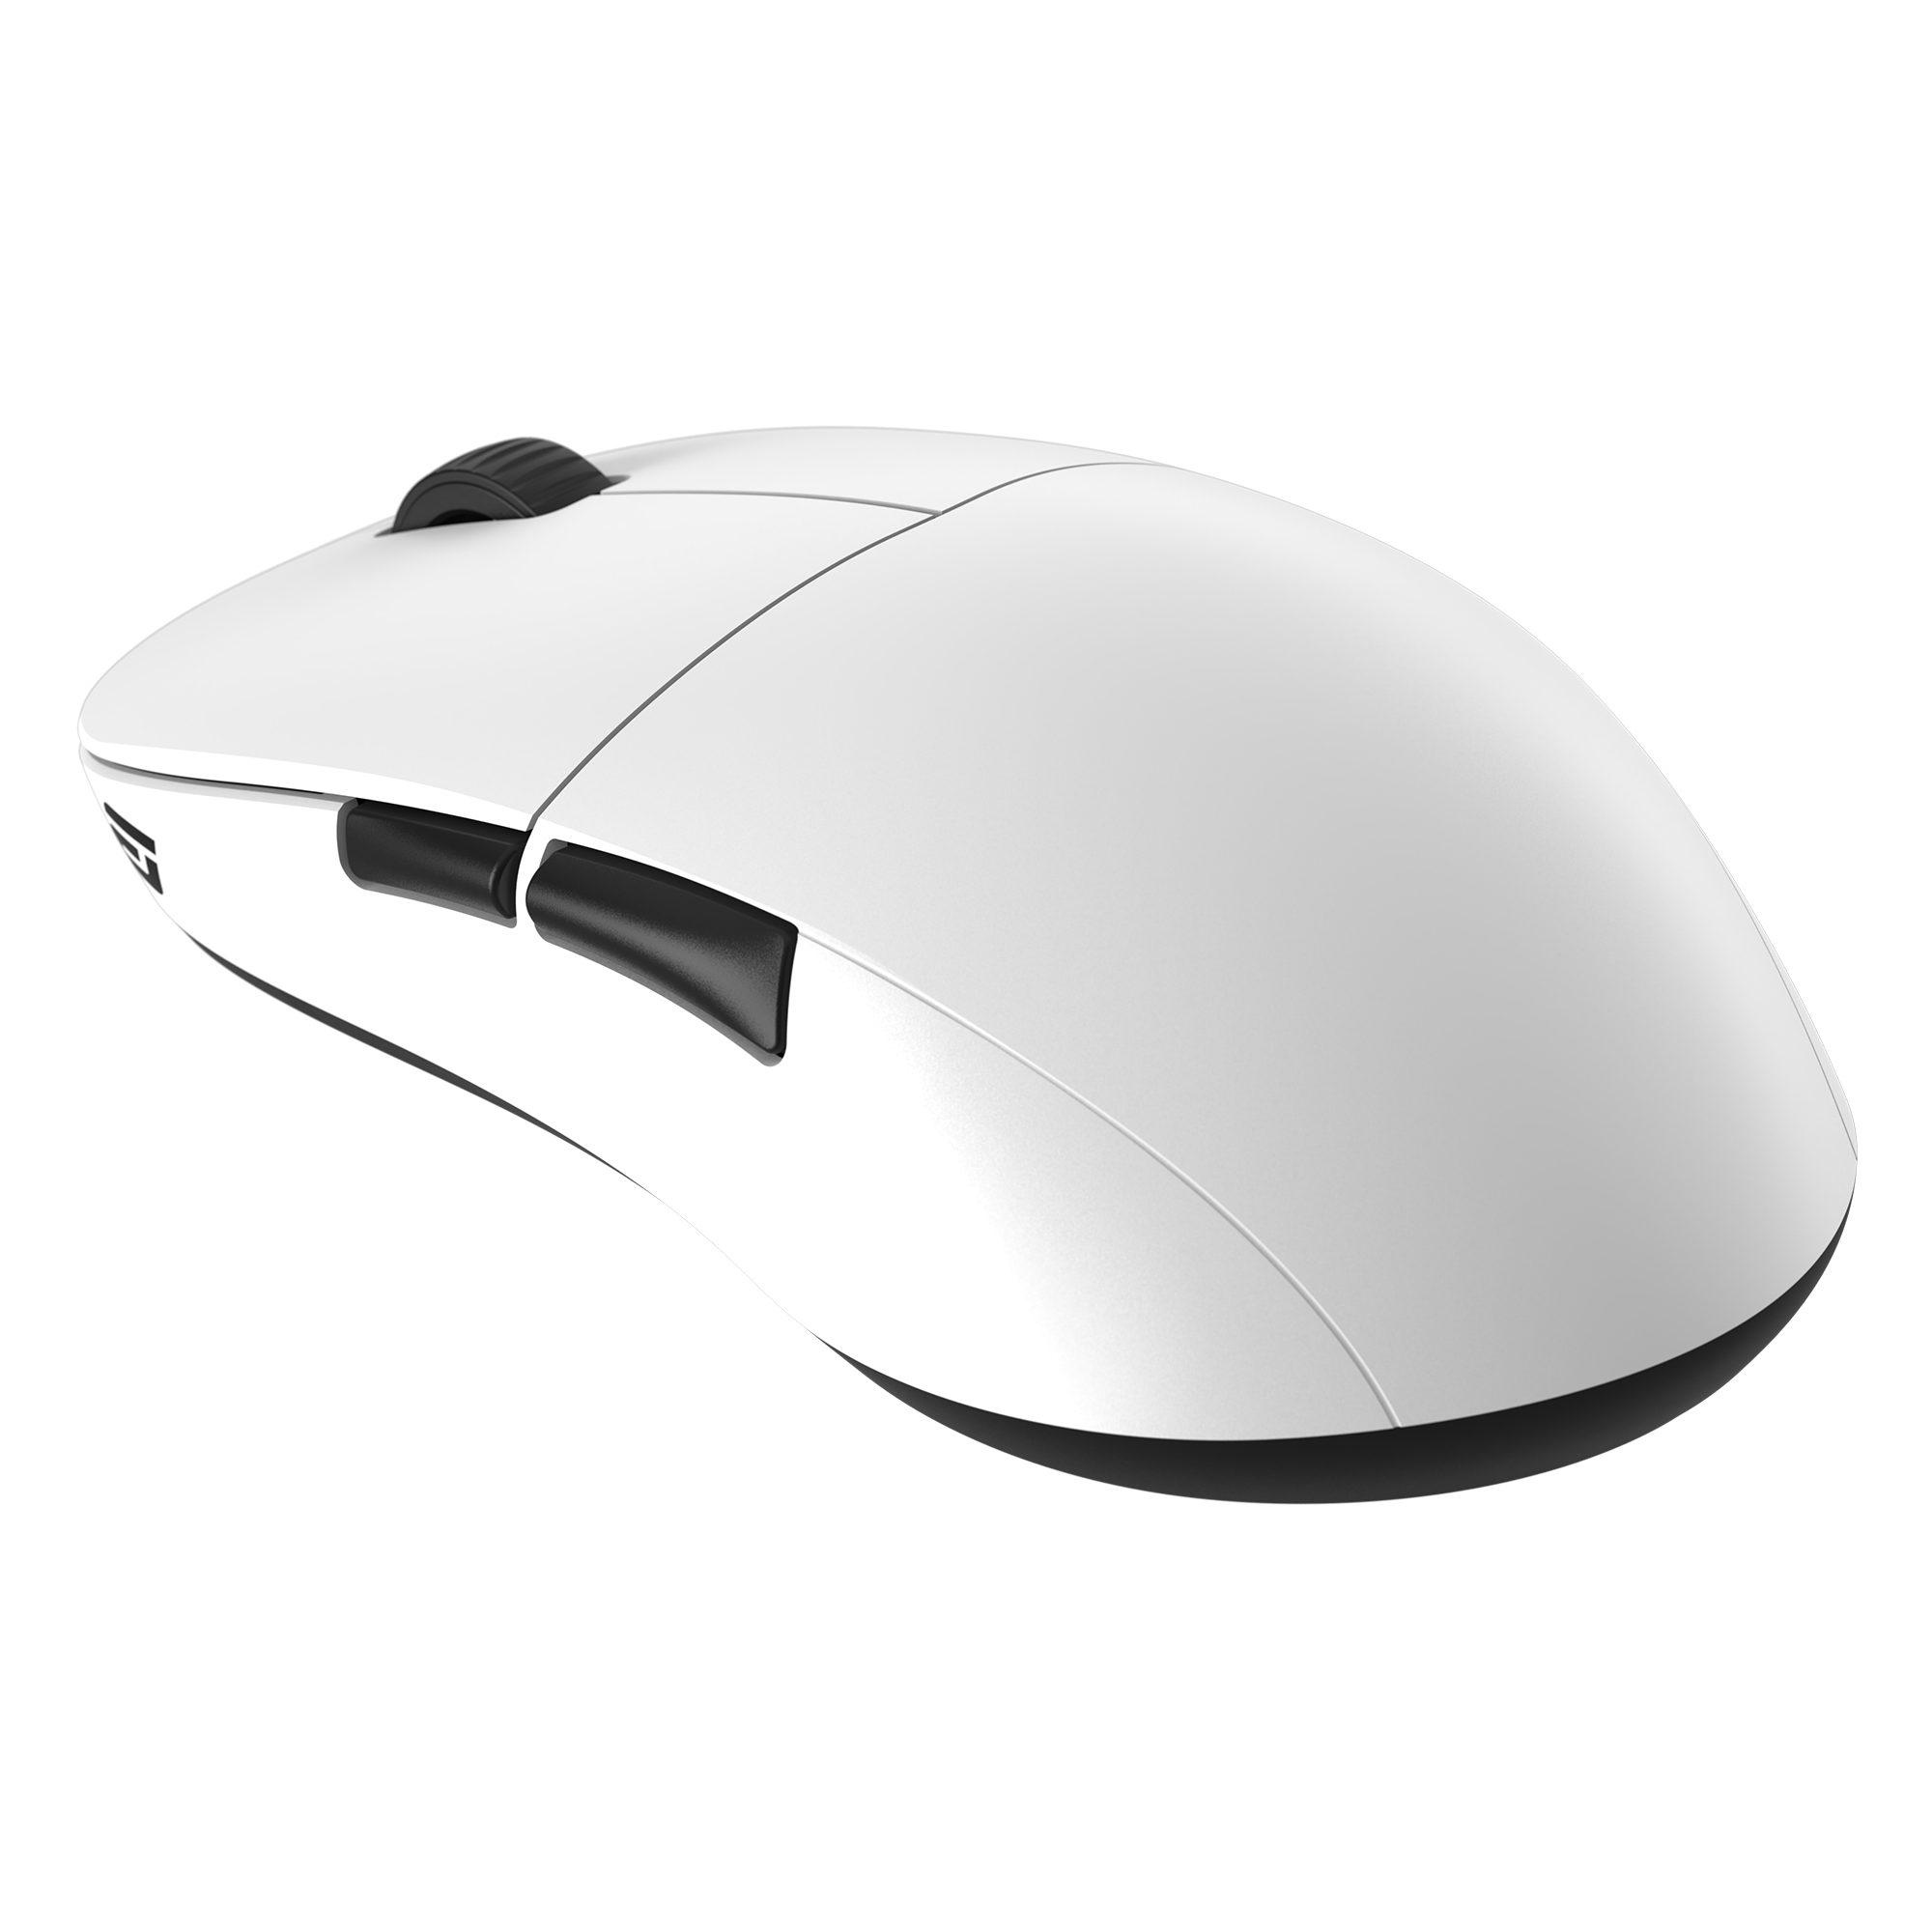 XM2w Wireless Gaming Mouse - White